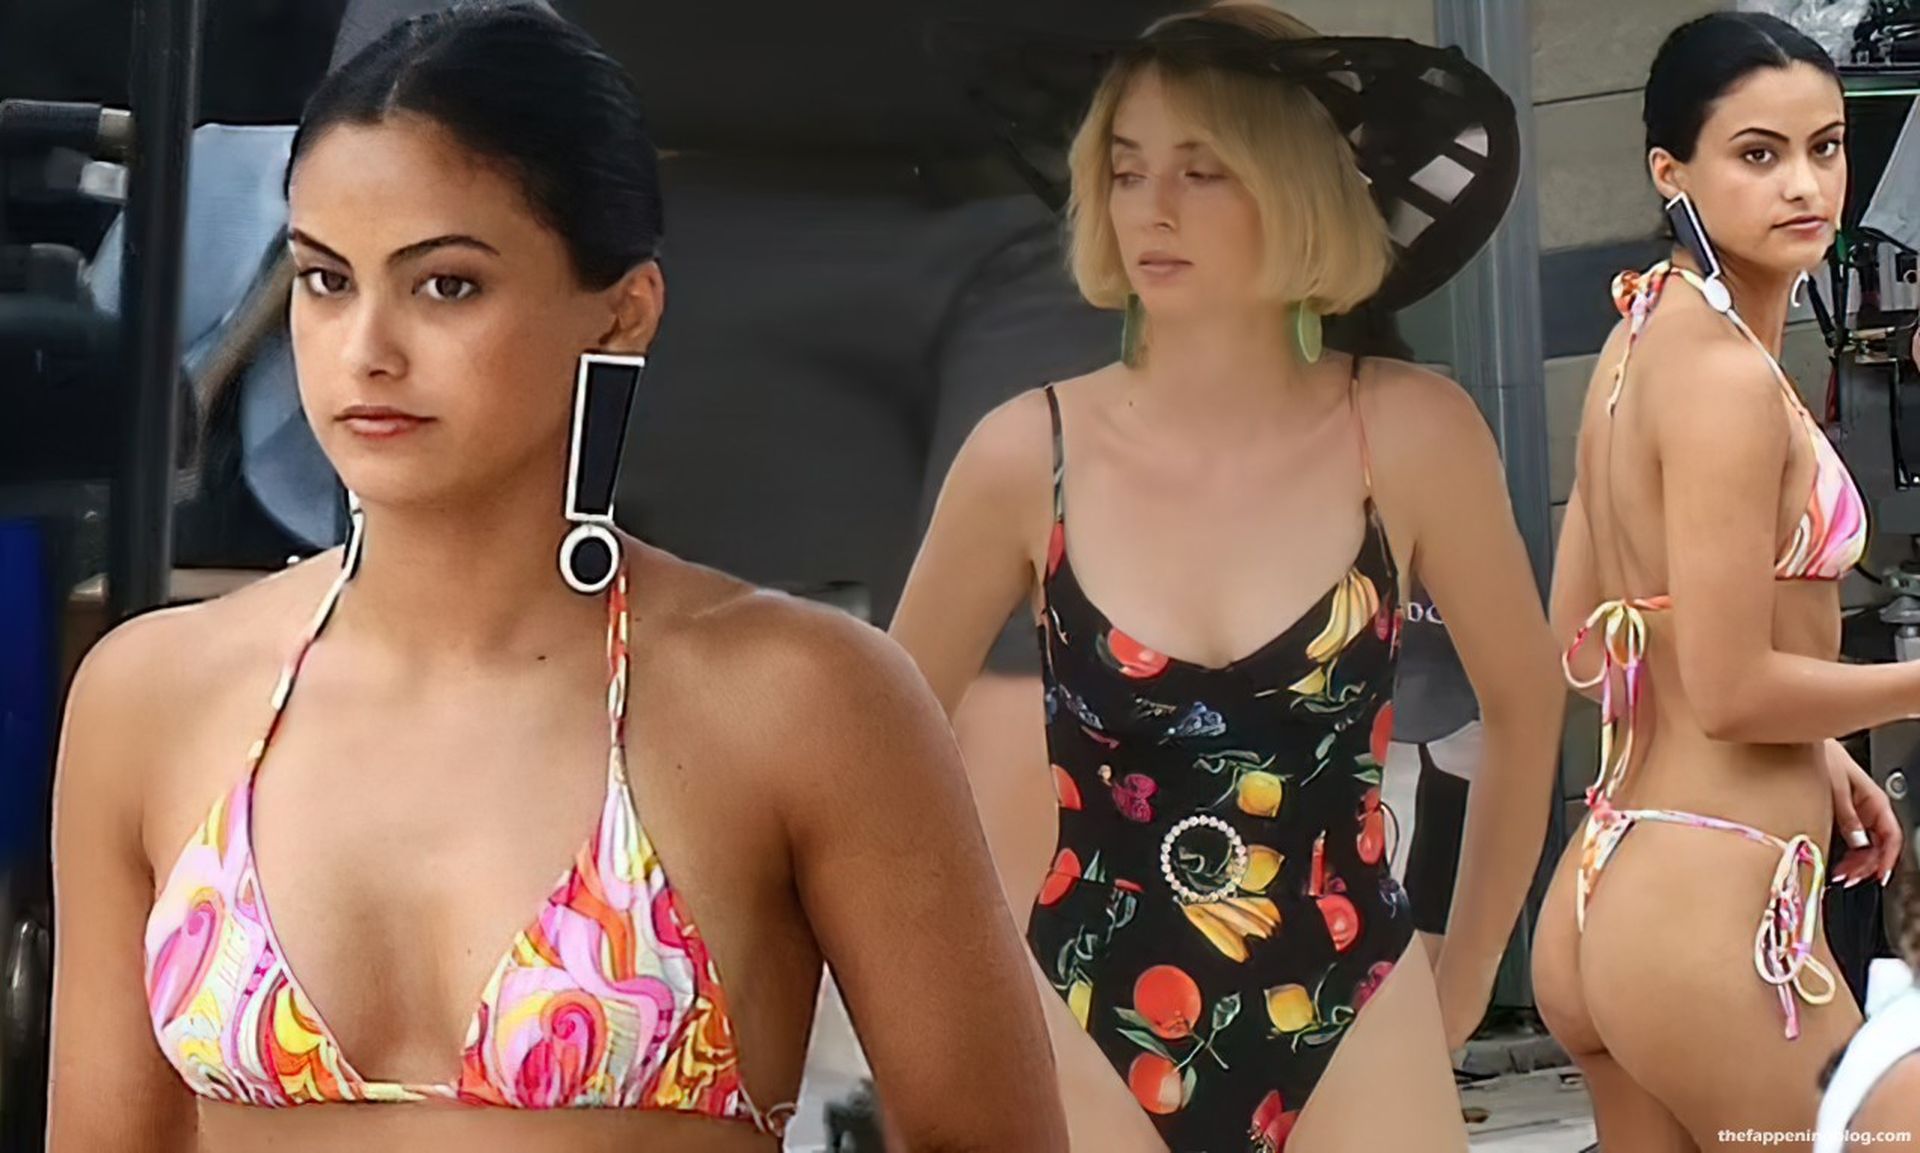 Camila-Mendes-Sexy-The-Fappening-Blog-72.jpg